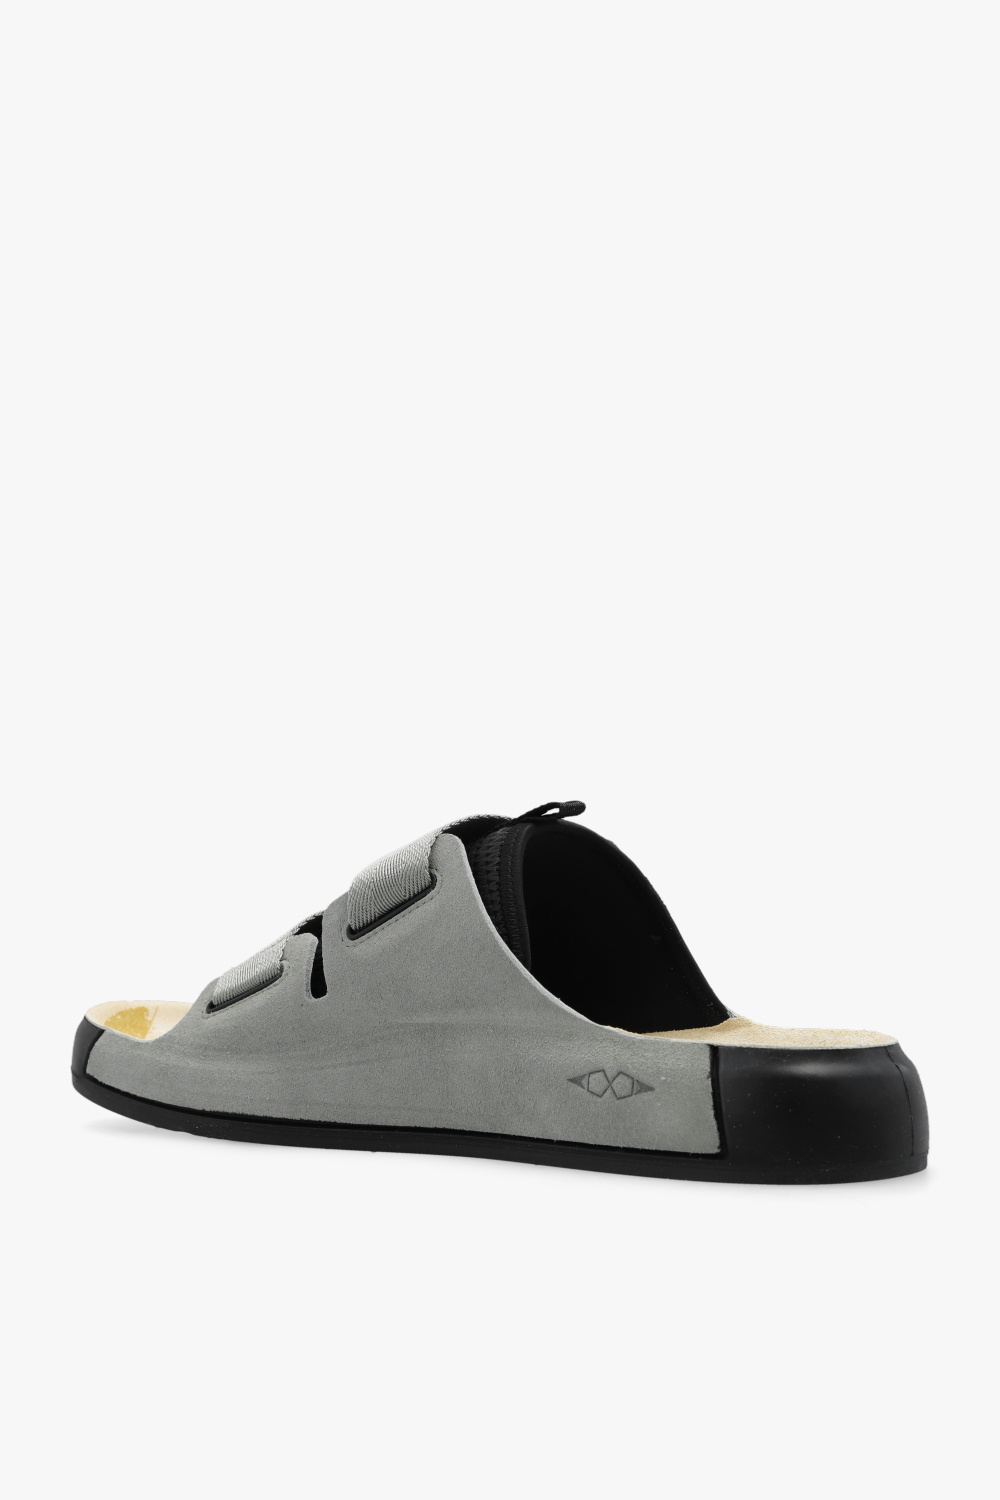 Stone Island GANNI two-tone recycled rubber ankle boots